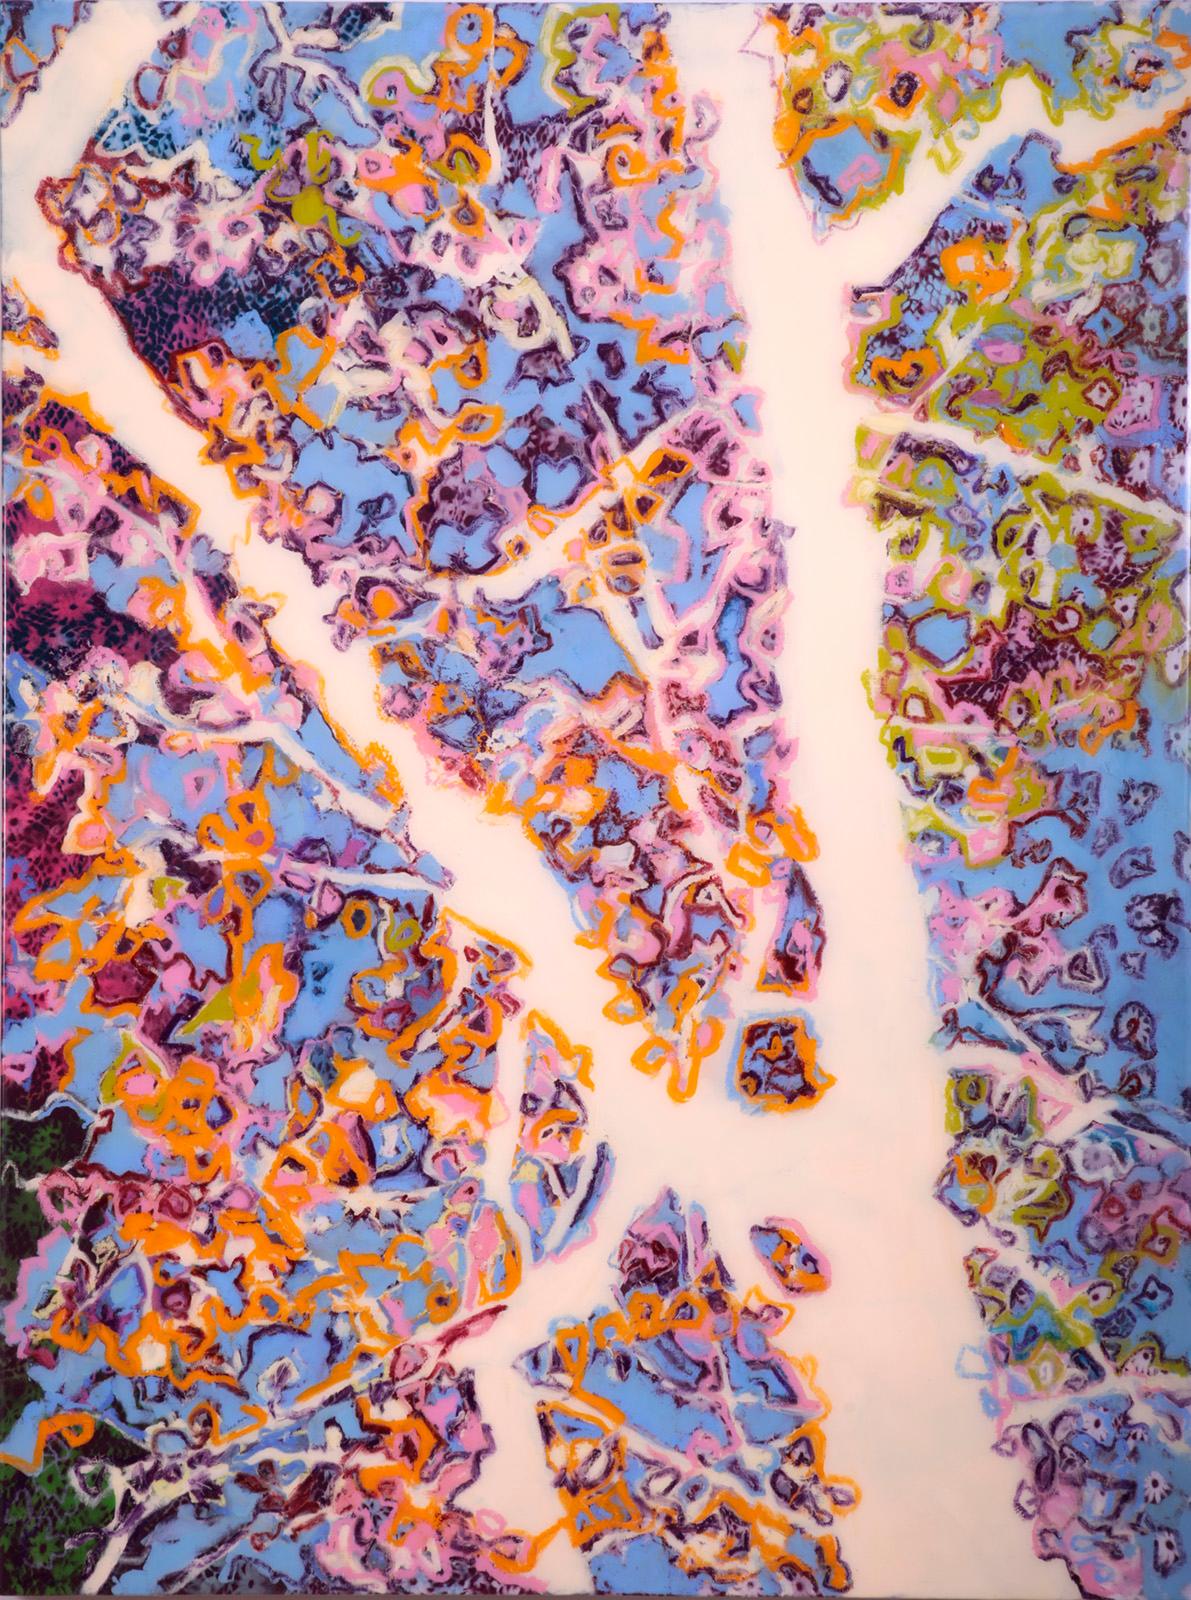 Rebecca Darlington Abstract Painting - "Splendor From The Sun", white trees against pink and orange leaves, blue sky